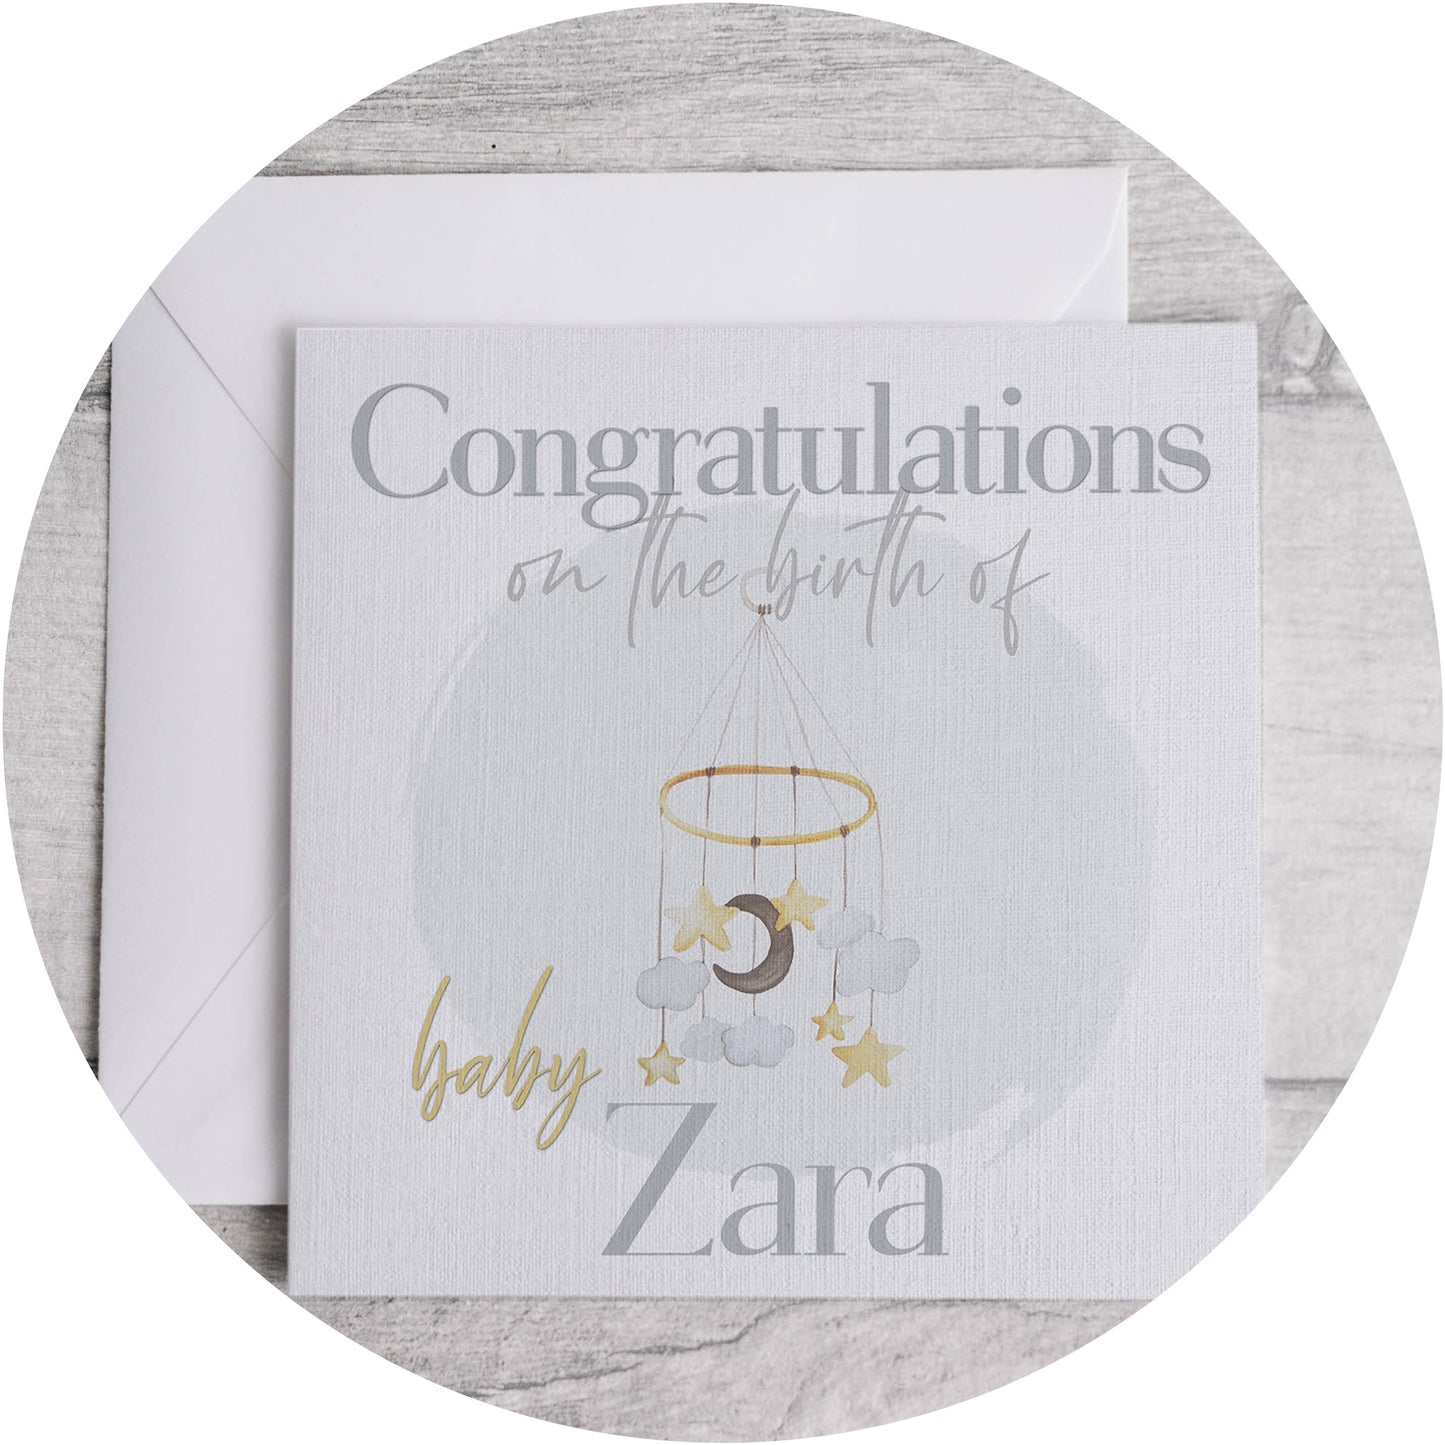 New Baby Mobile Card - Congratulations Moon & Star